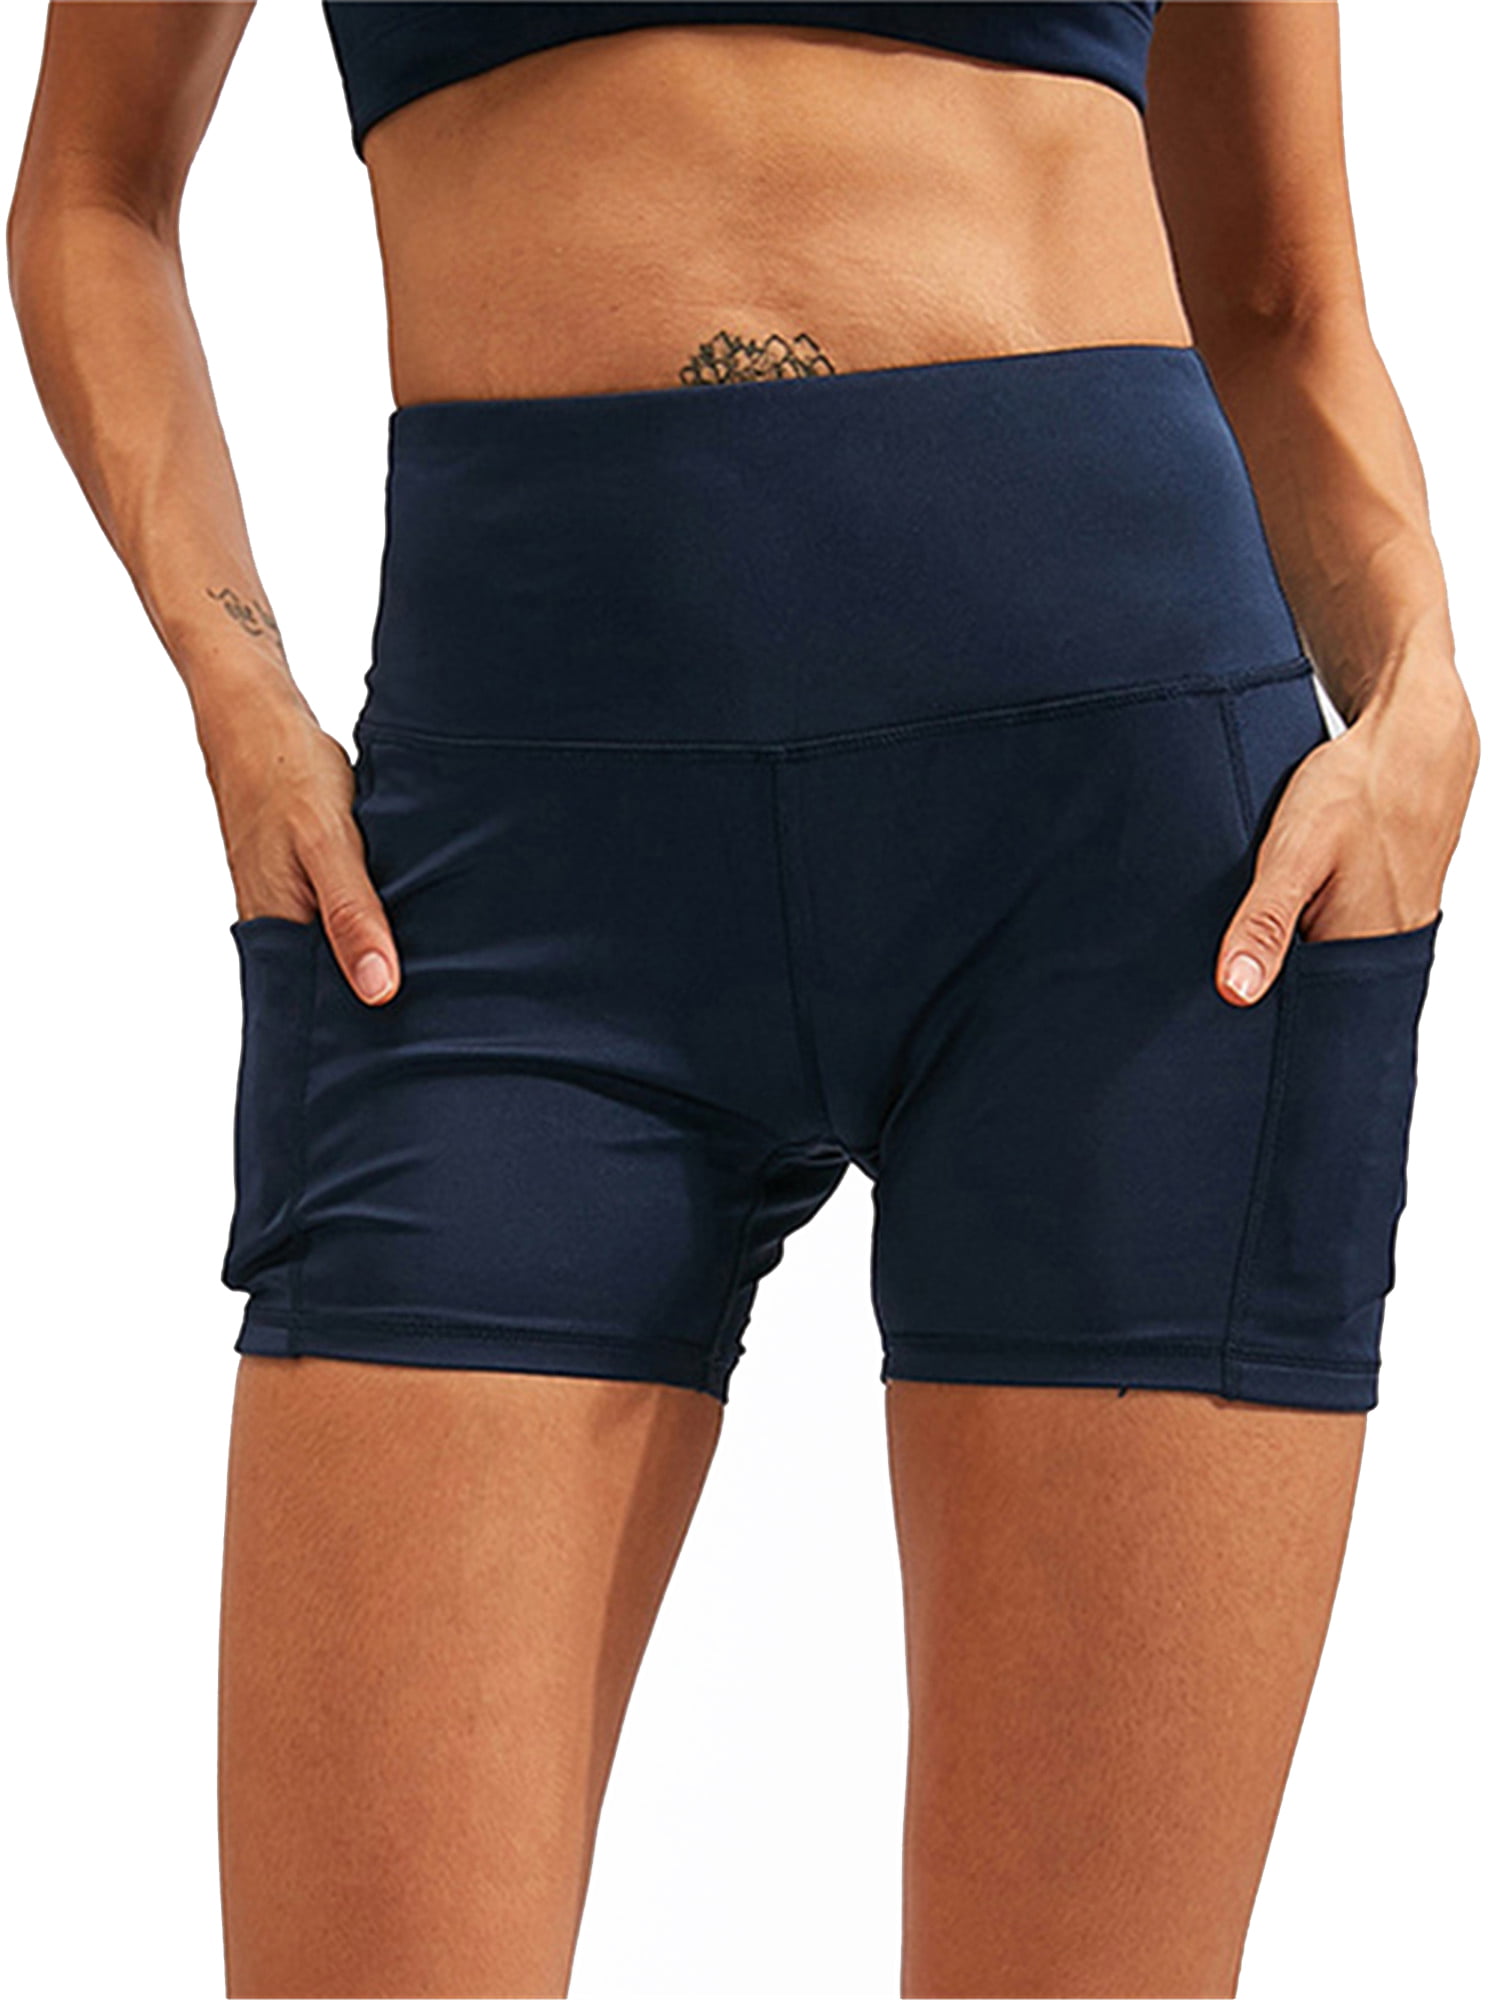 women's workout shorts with pockets